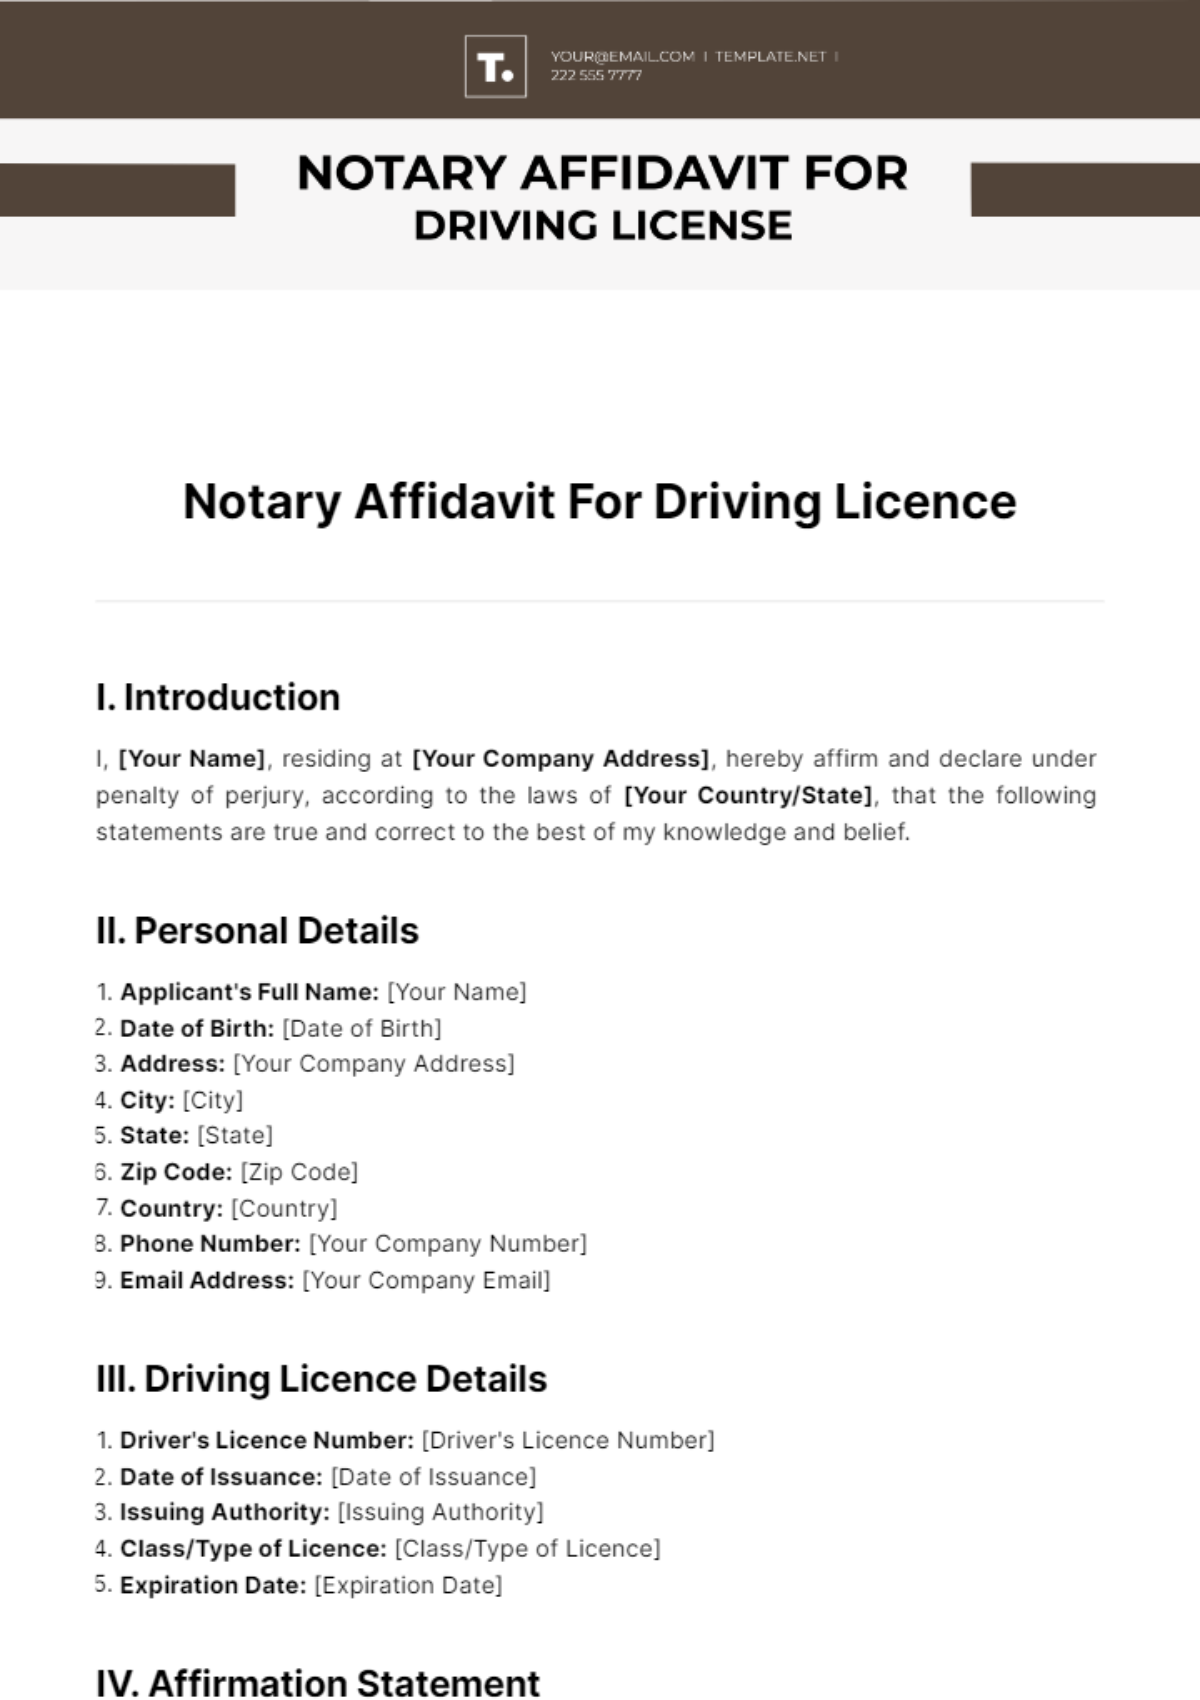 Notary Affidavit For Driving Licence Template